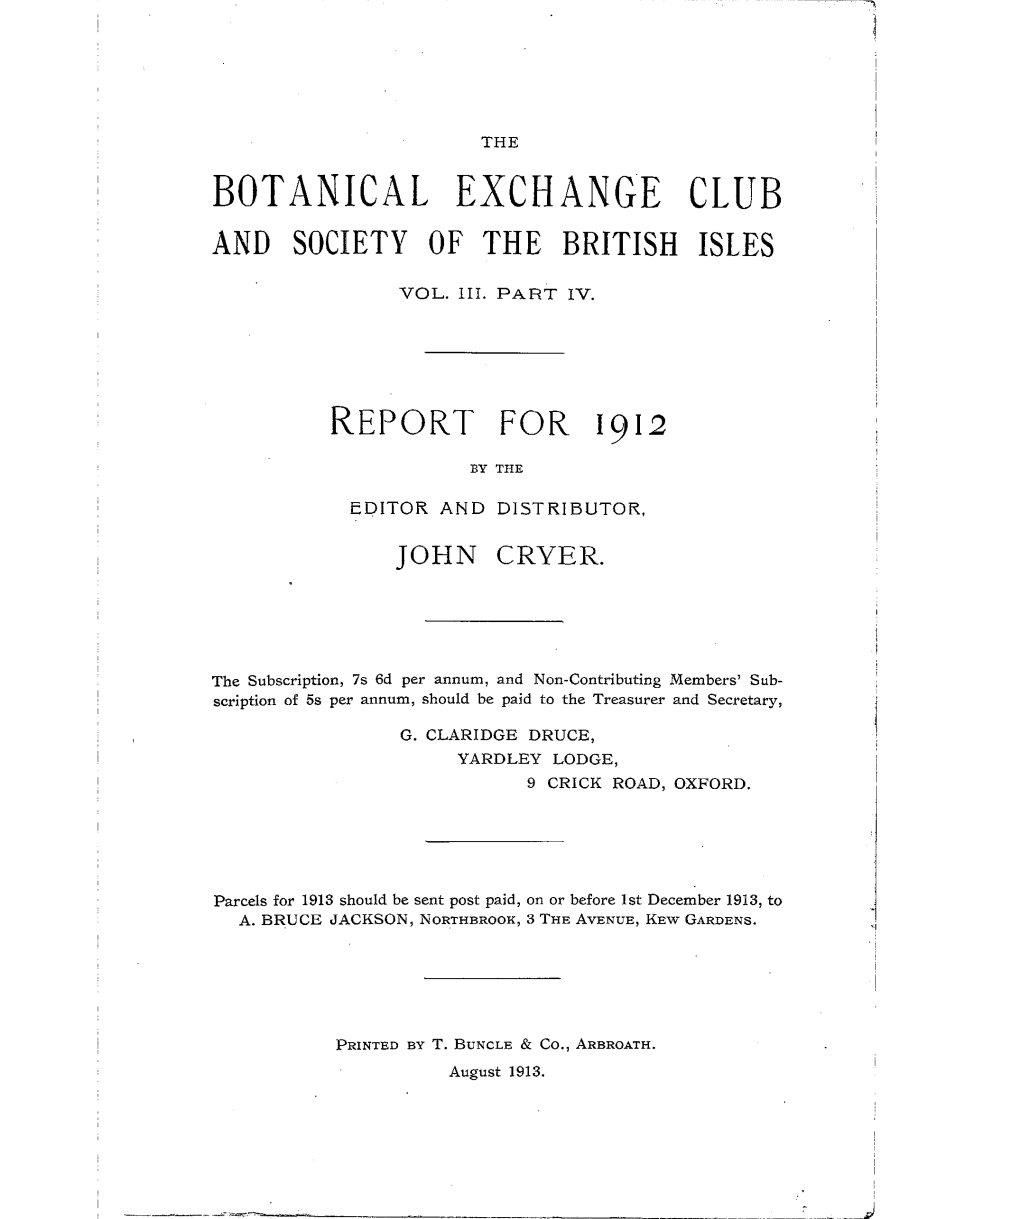 Botanical Exchange Club and Society of the British Isles